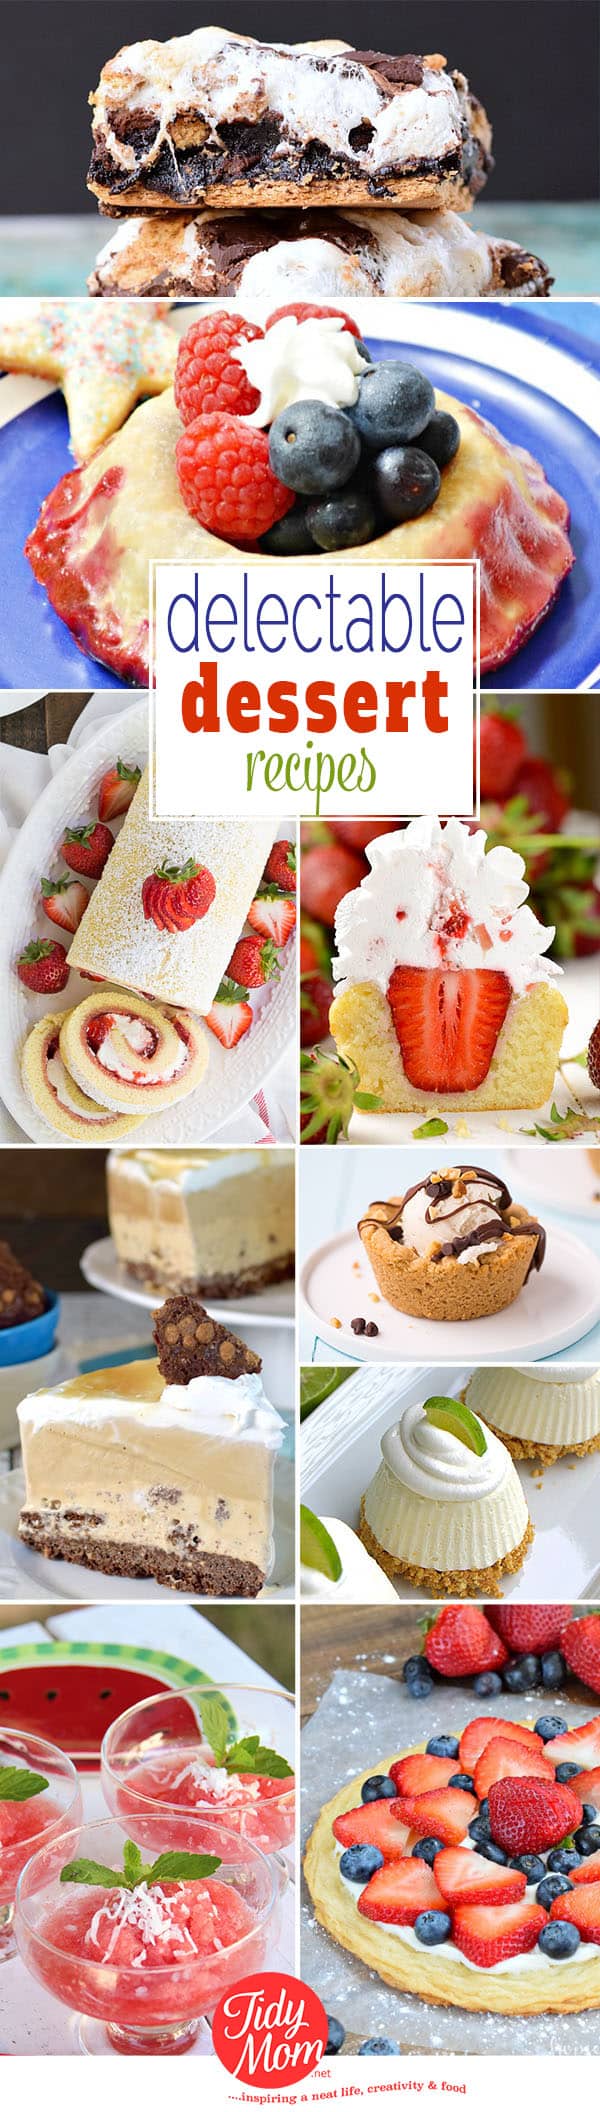 From juicy summer berries and ice cream pie to S'mores brownies, you'll want to end your next meal with one of these Delectable Dessert recipes at TidyMom.net